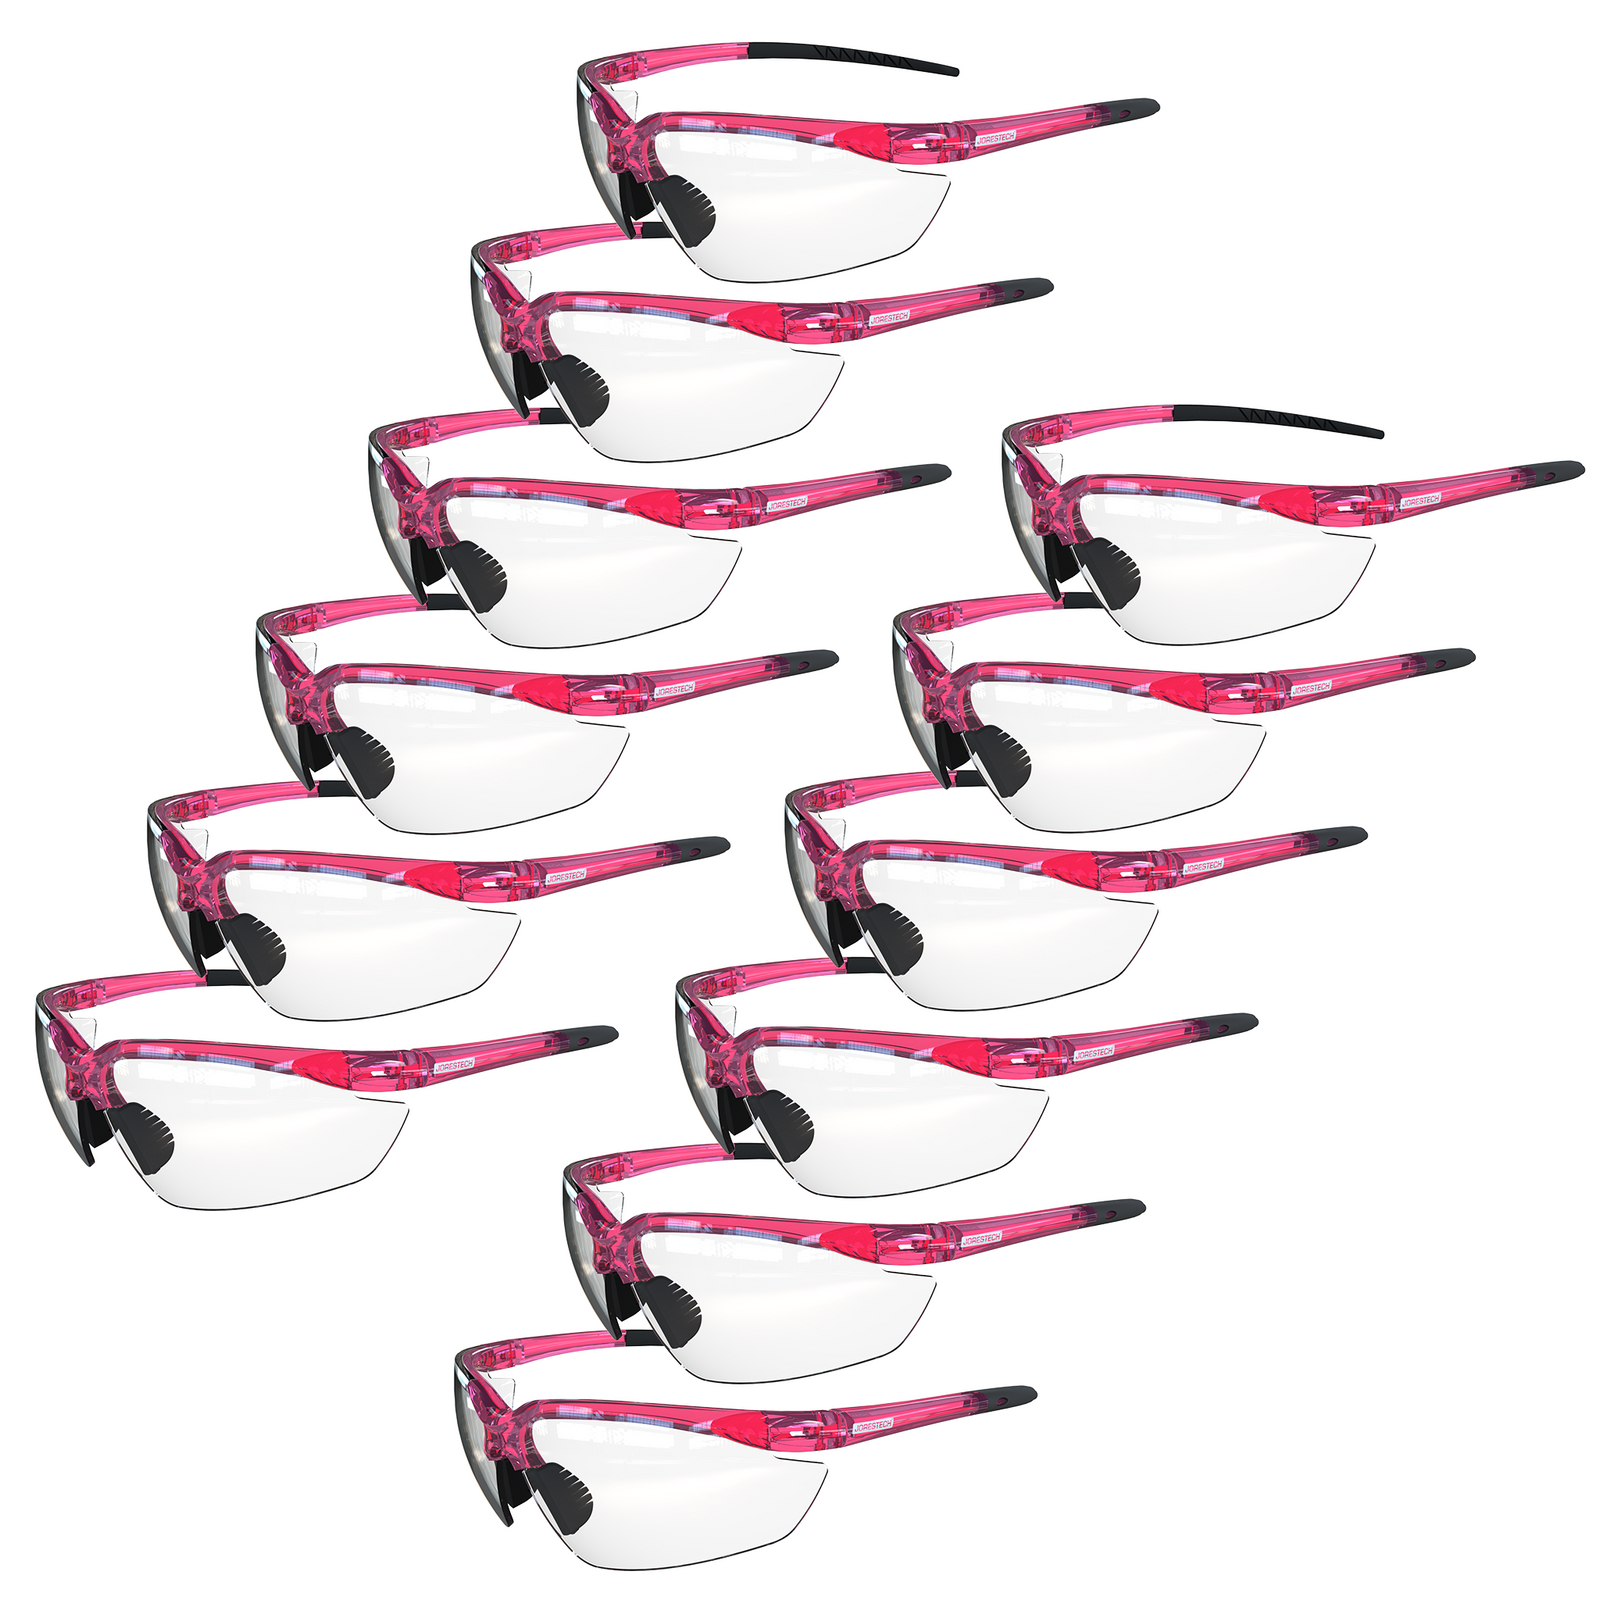 12 pack of the wrap around safety glasses with flexible rubber temple clear lenses and pink frame